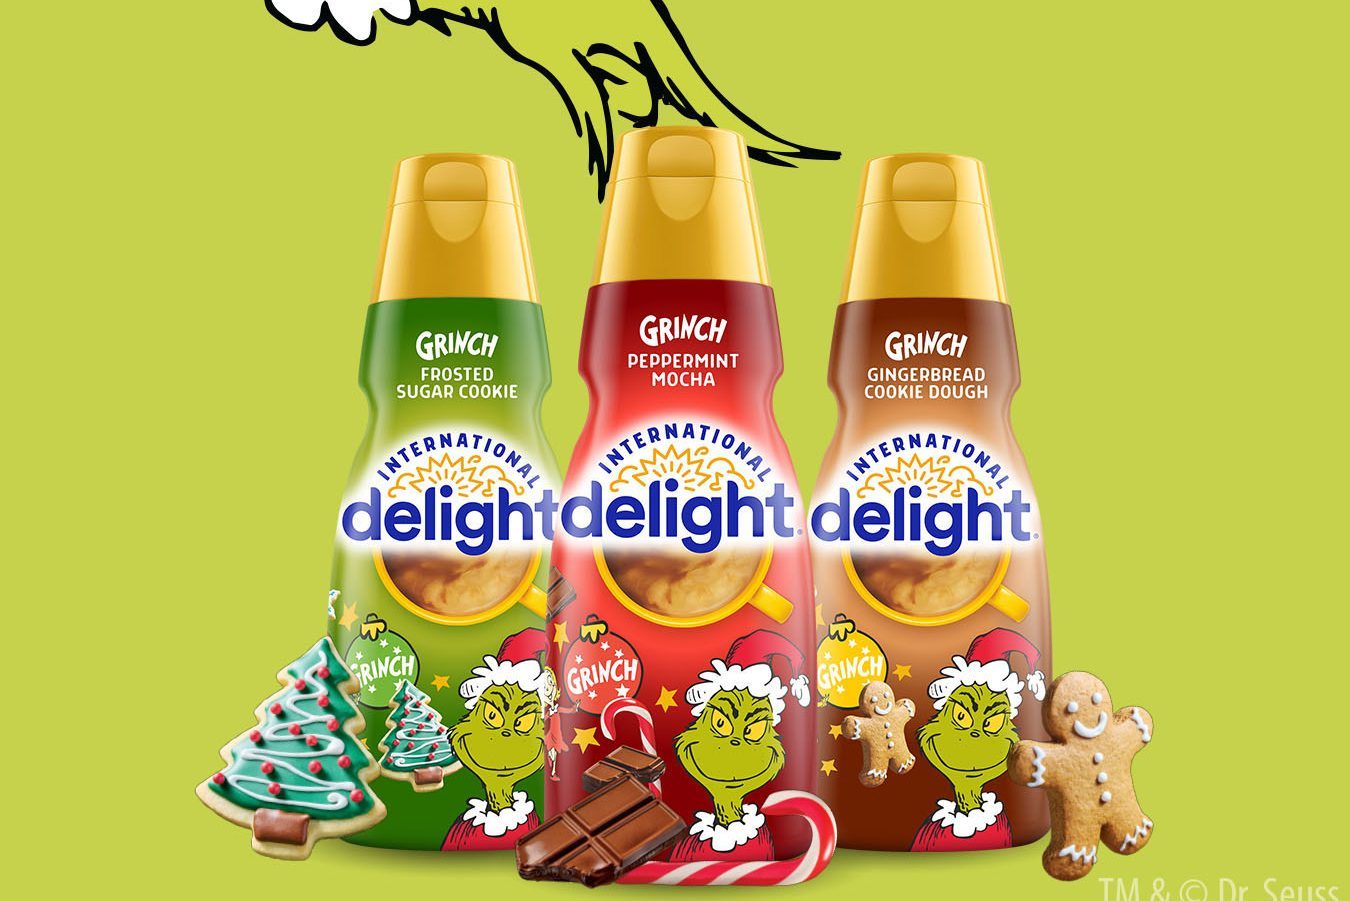 International Delight's Limited Edition Grinch Peppermint Mocha